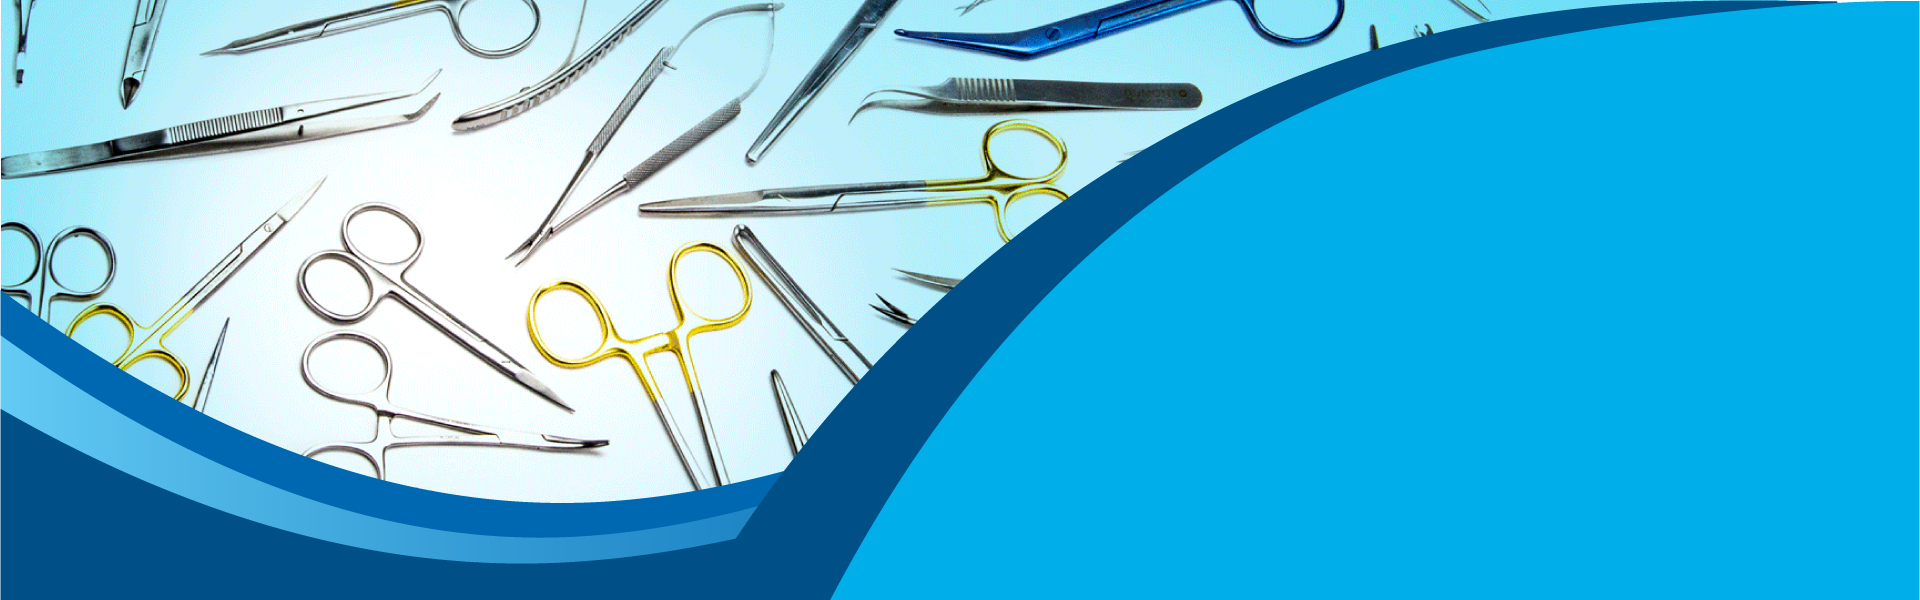 Save up to 30% off Surgical Instruments - Some Exclusions Apply